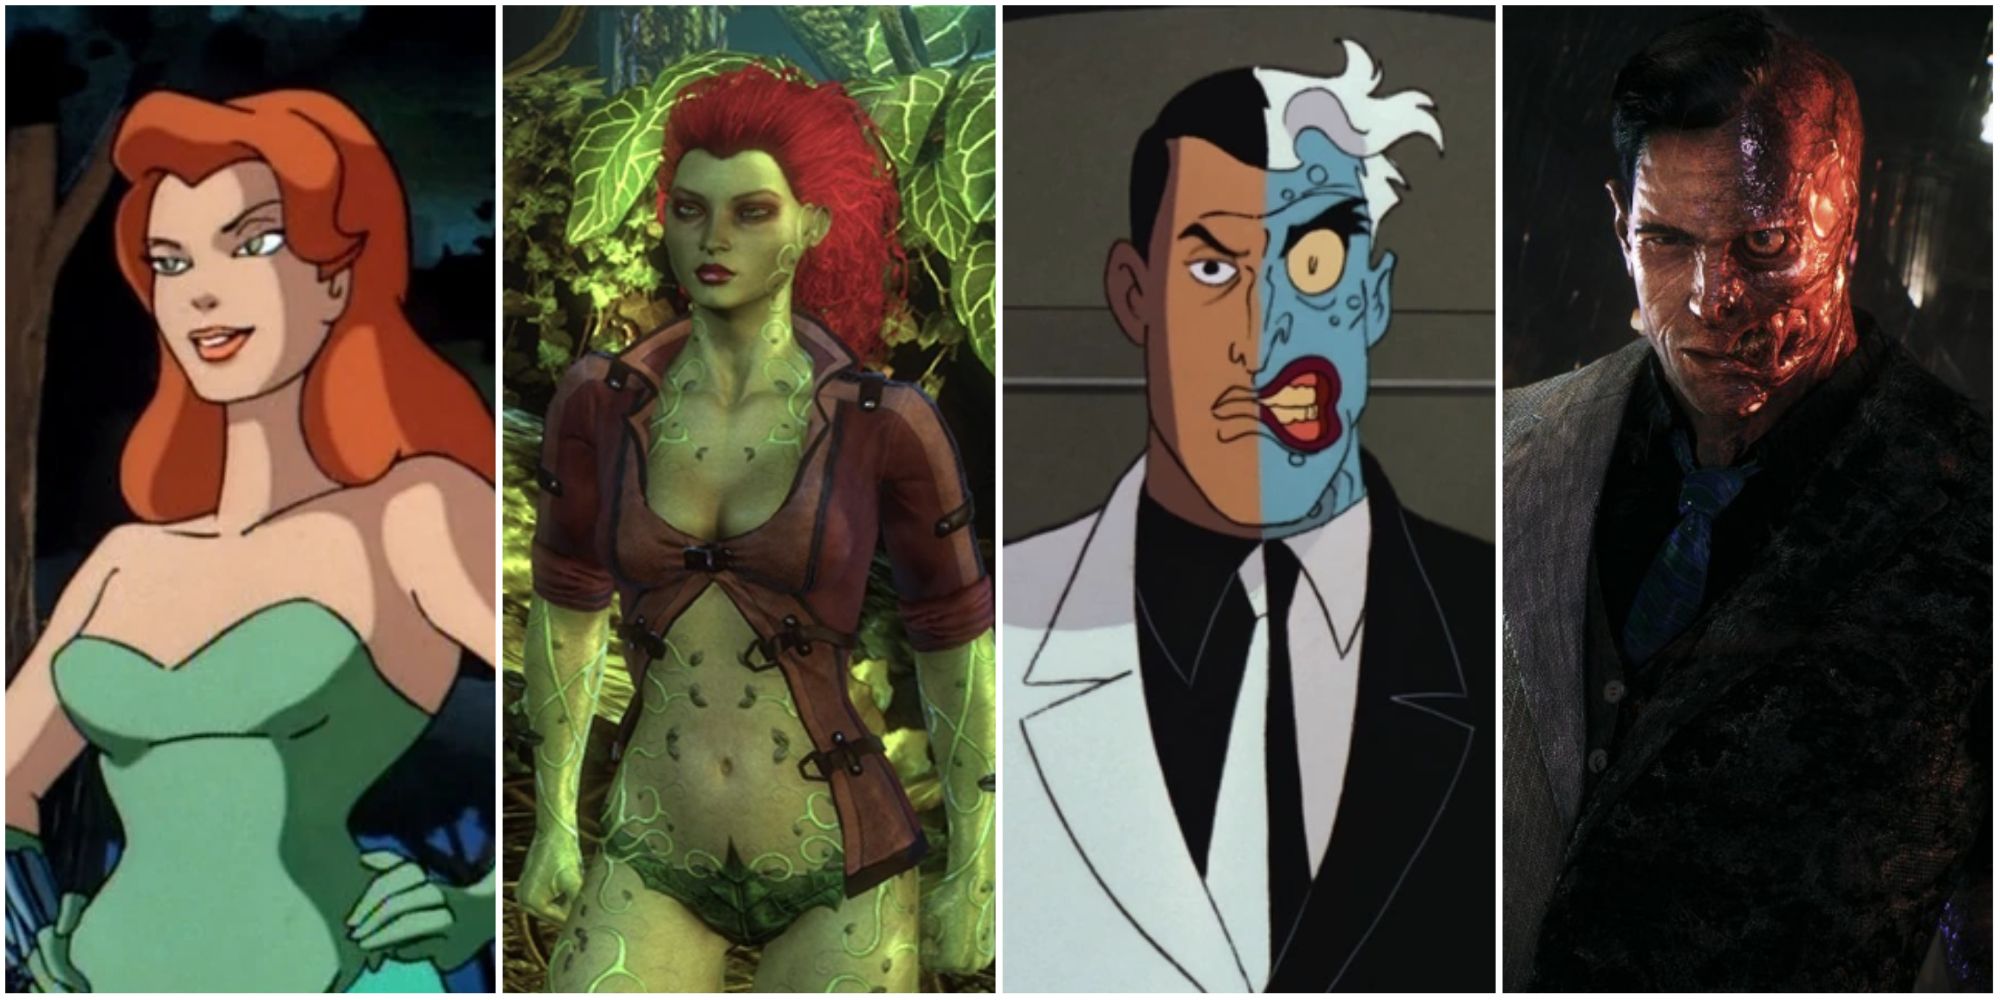 Poison Ivy and Two-Face in Batman: The Animated Series, Arkham City, and Arkham Knight